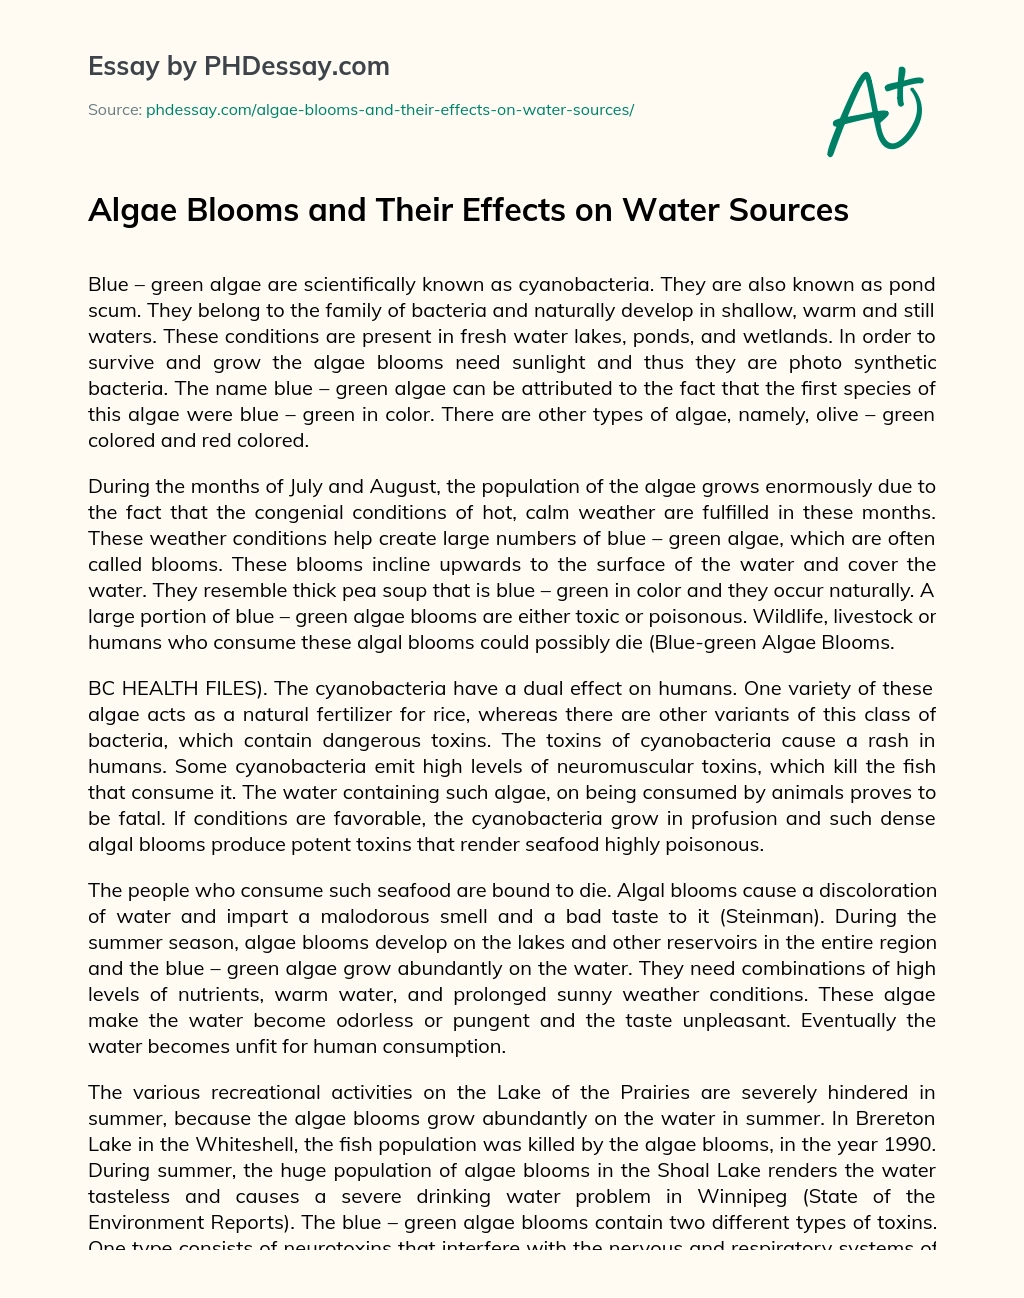 Algae Blooms and Their Effects on Water Sources essay